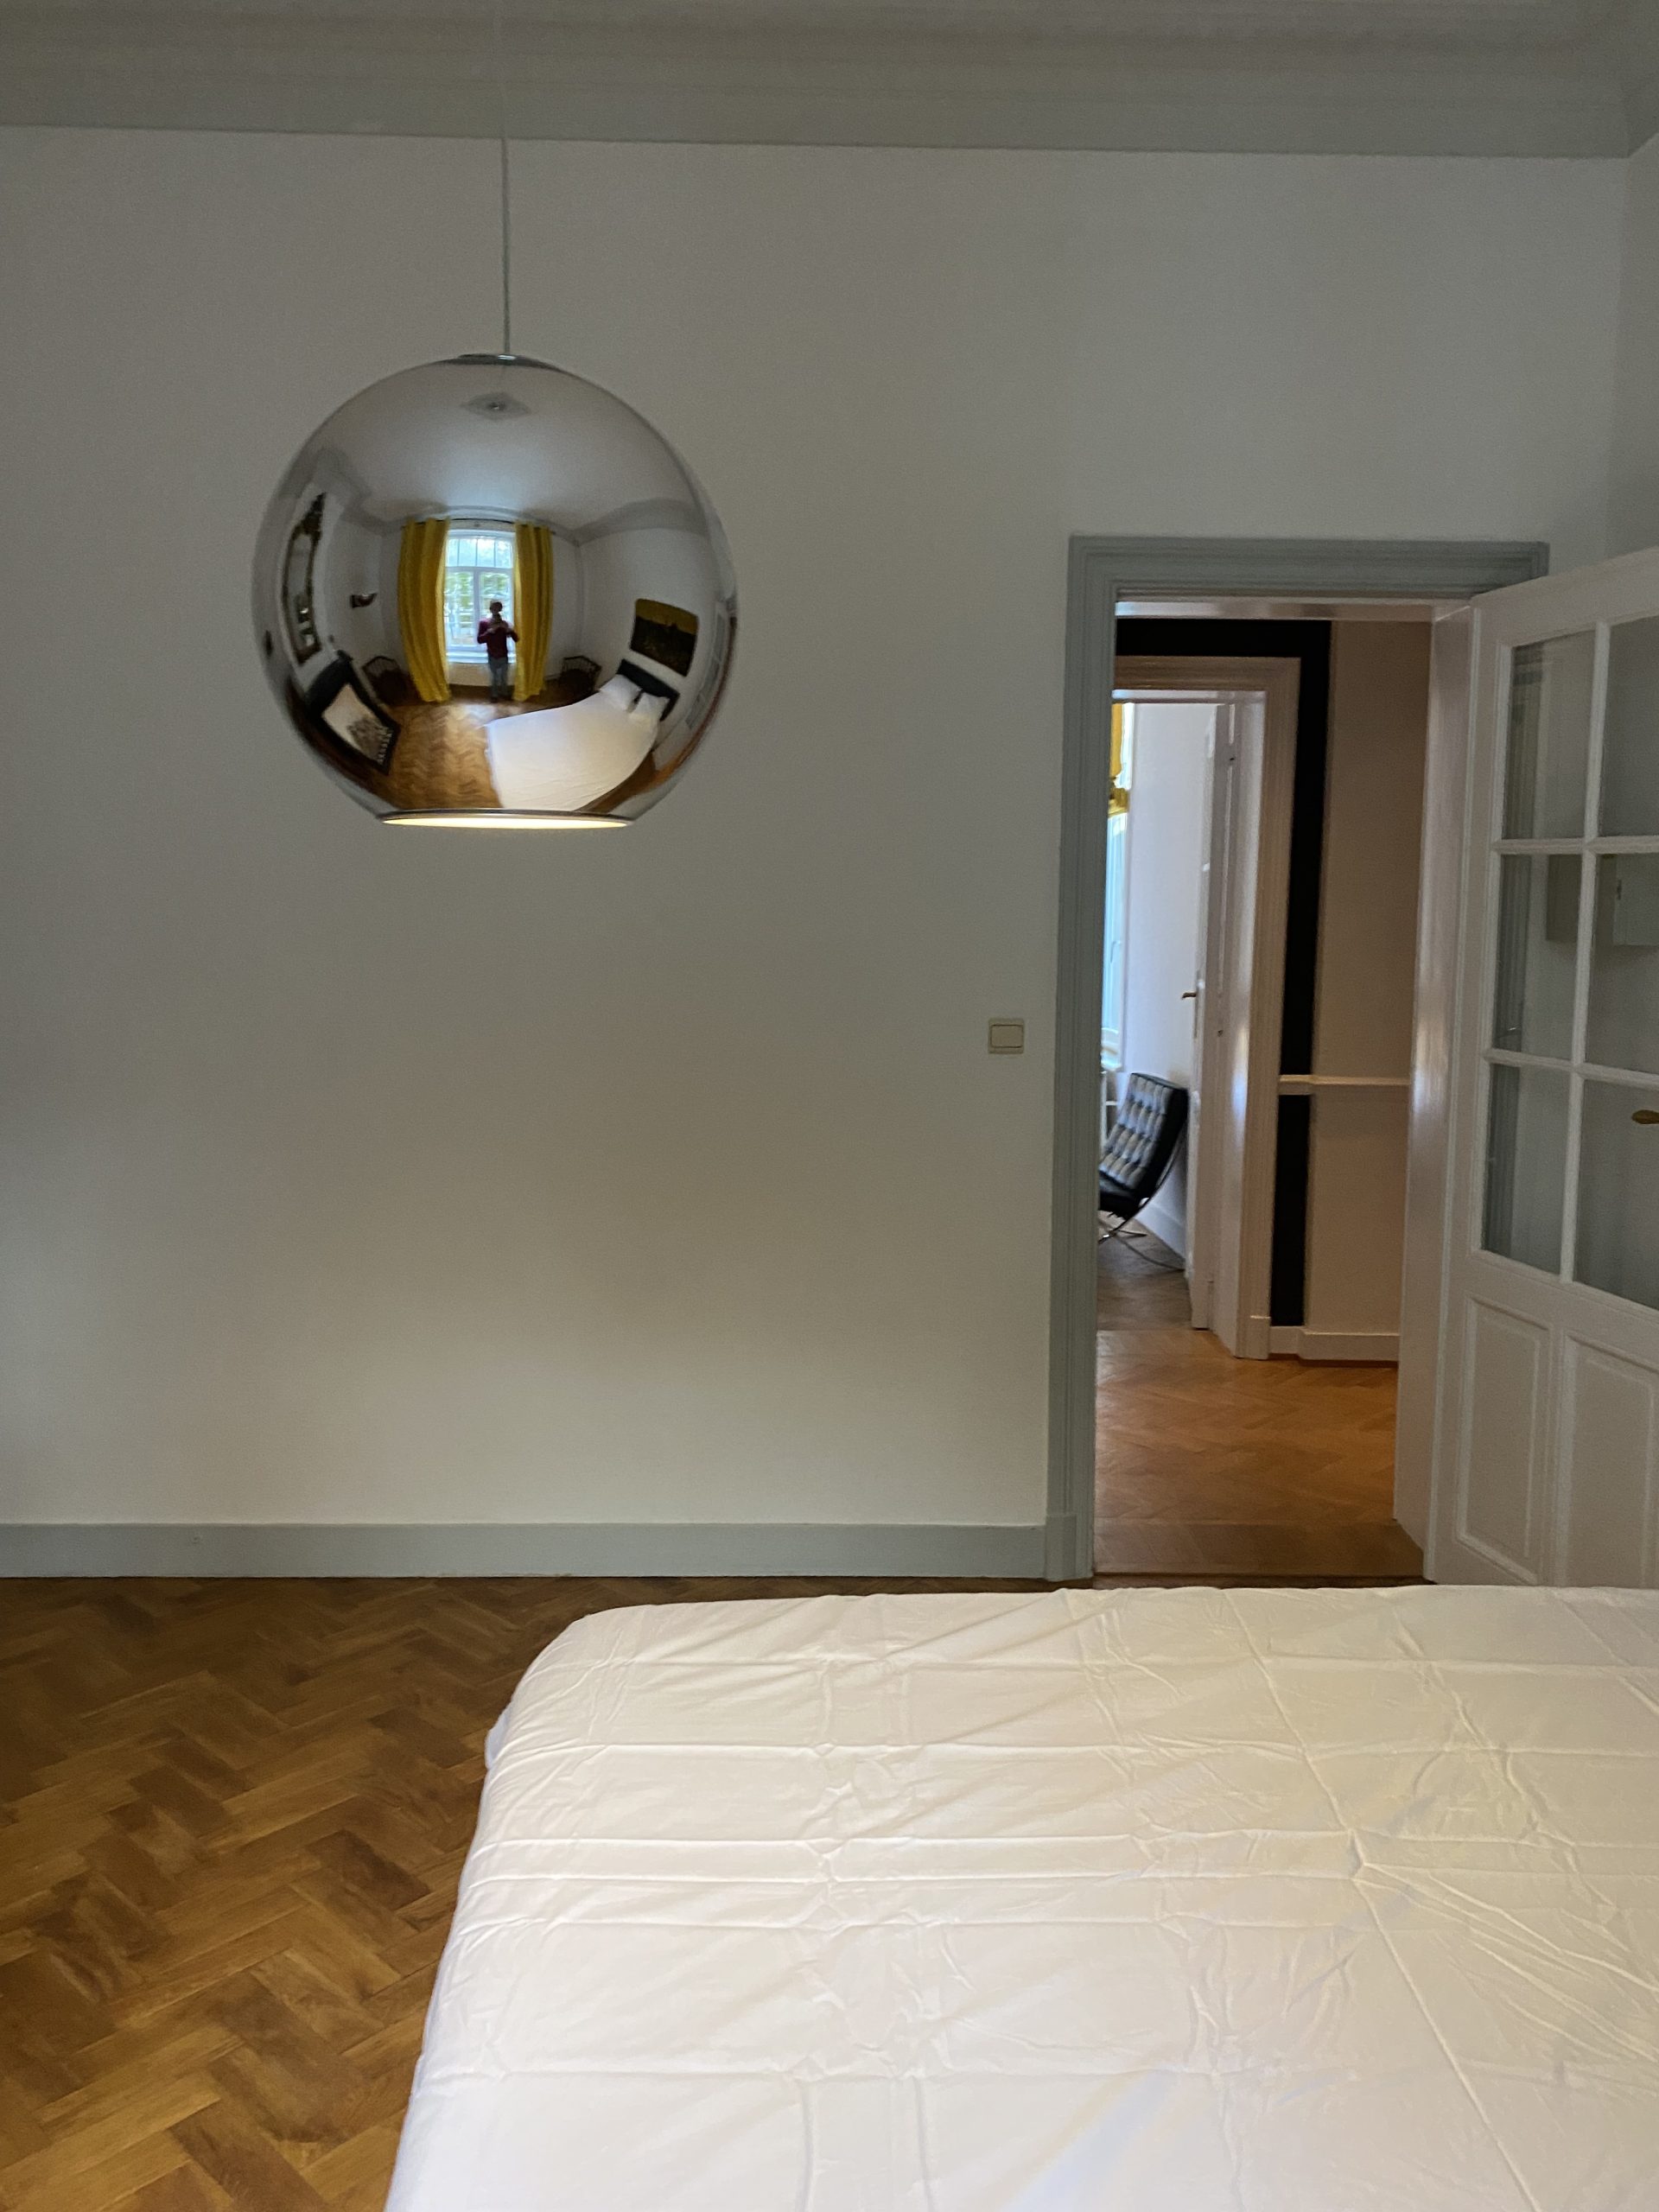 Molière - Exclusive apartment for rent in Brussels - bedroom